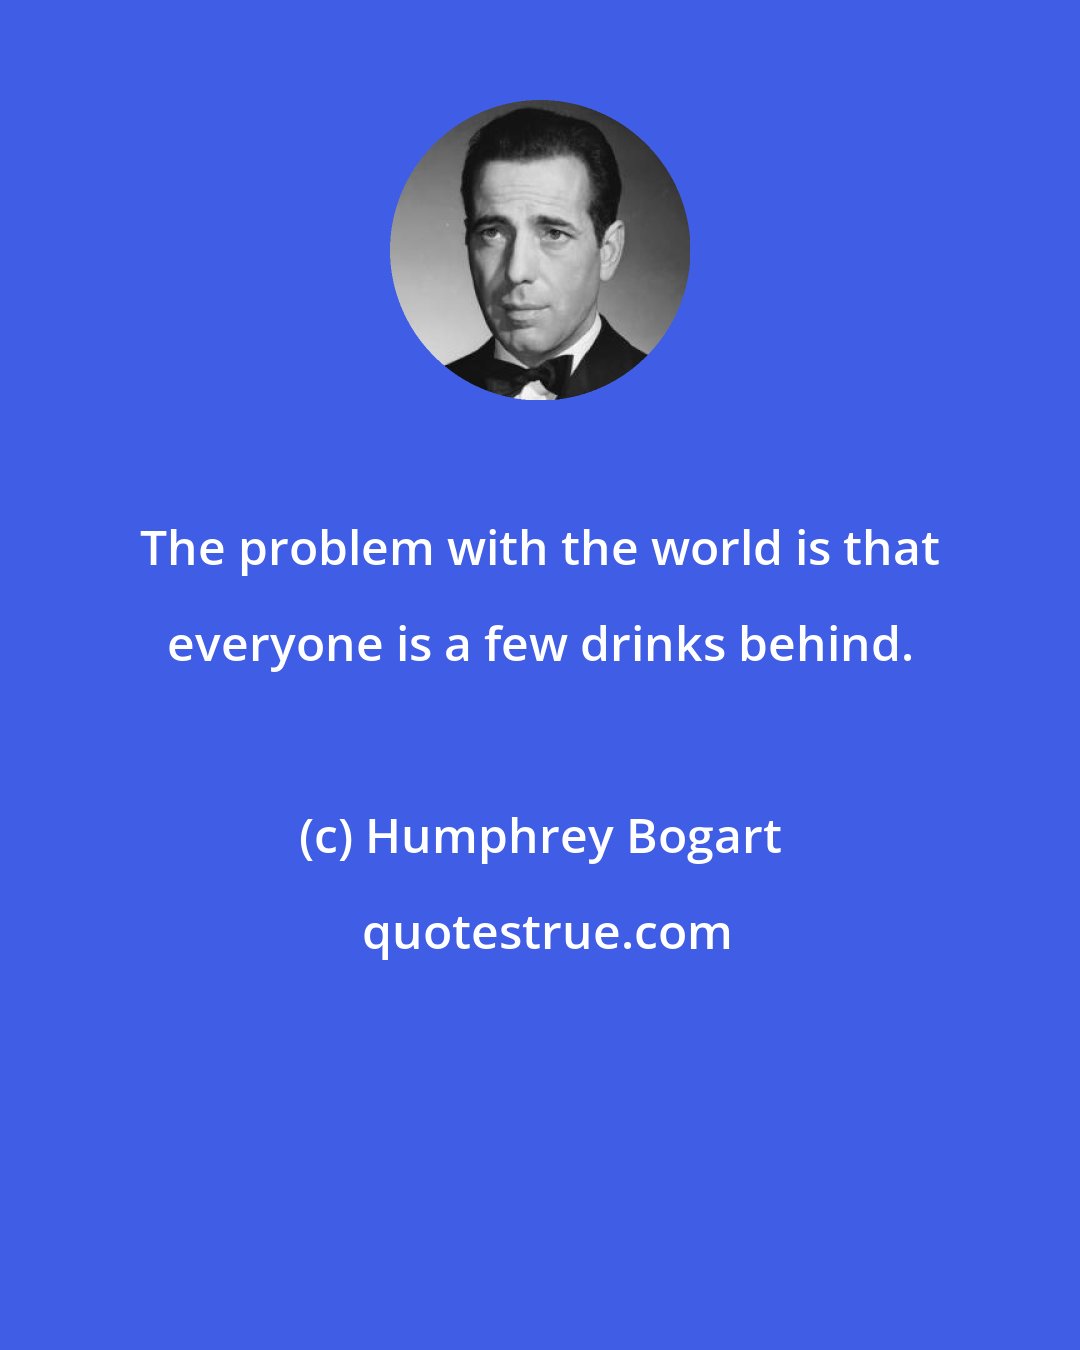 Humphrey Bogart: The problem with the world is that everyone is a few drinks behind.